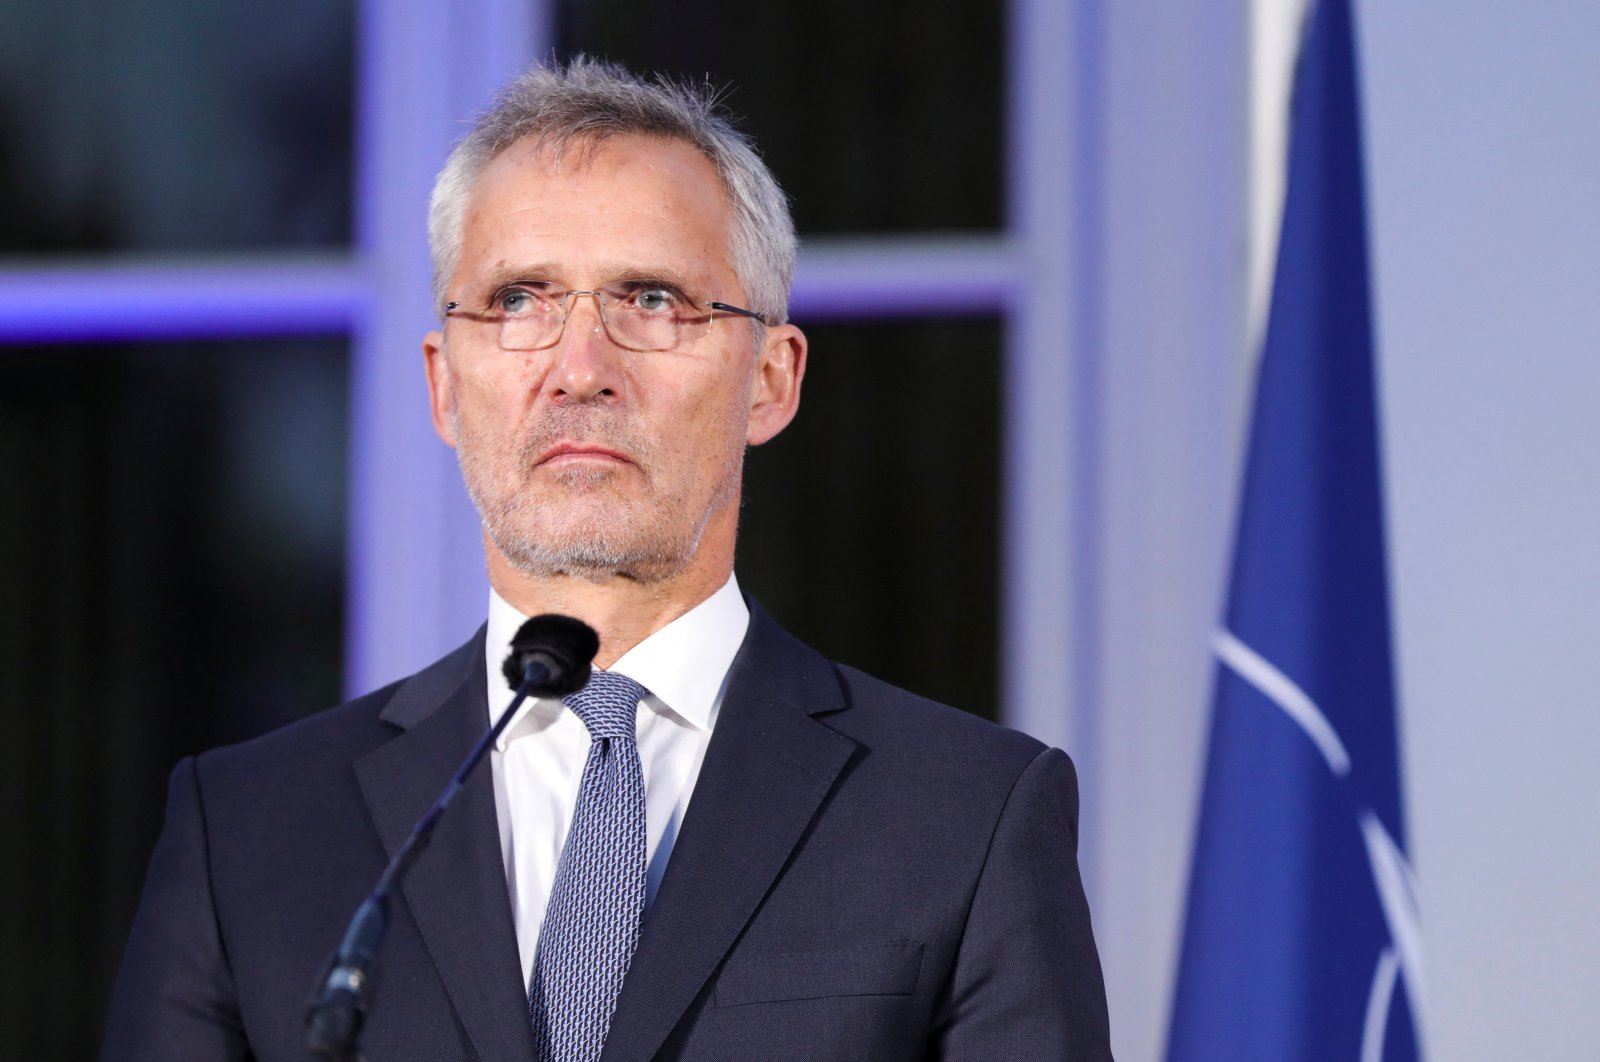 NATO Secretary-General Jens Stoltenberg attends a press conference after a meeting to prepare the upcoming Madrid summit of the alliance, in The Hague, Netherlands, June 14, 2022. (Reuters Photo)